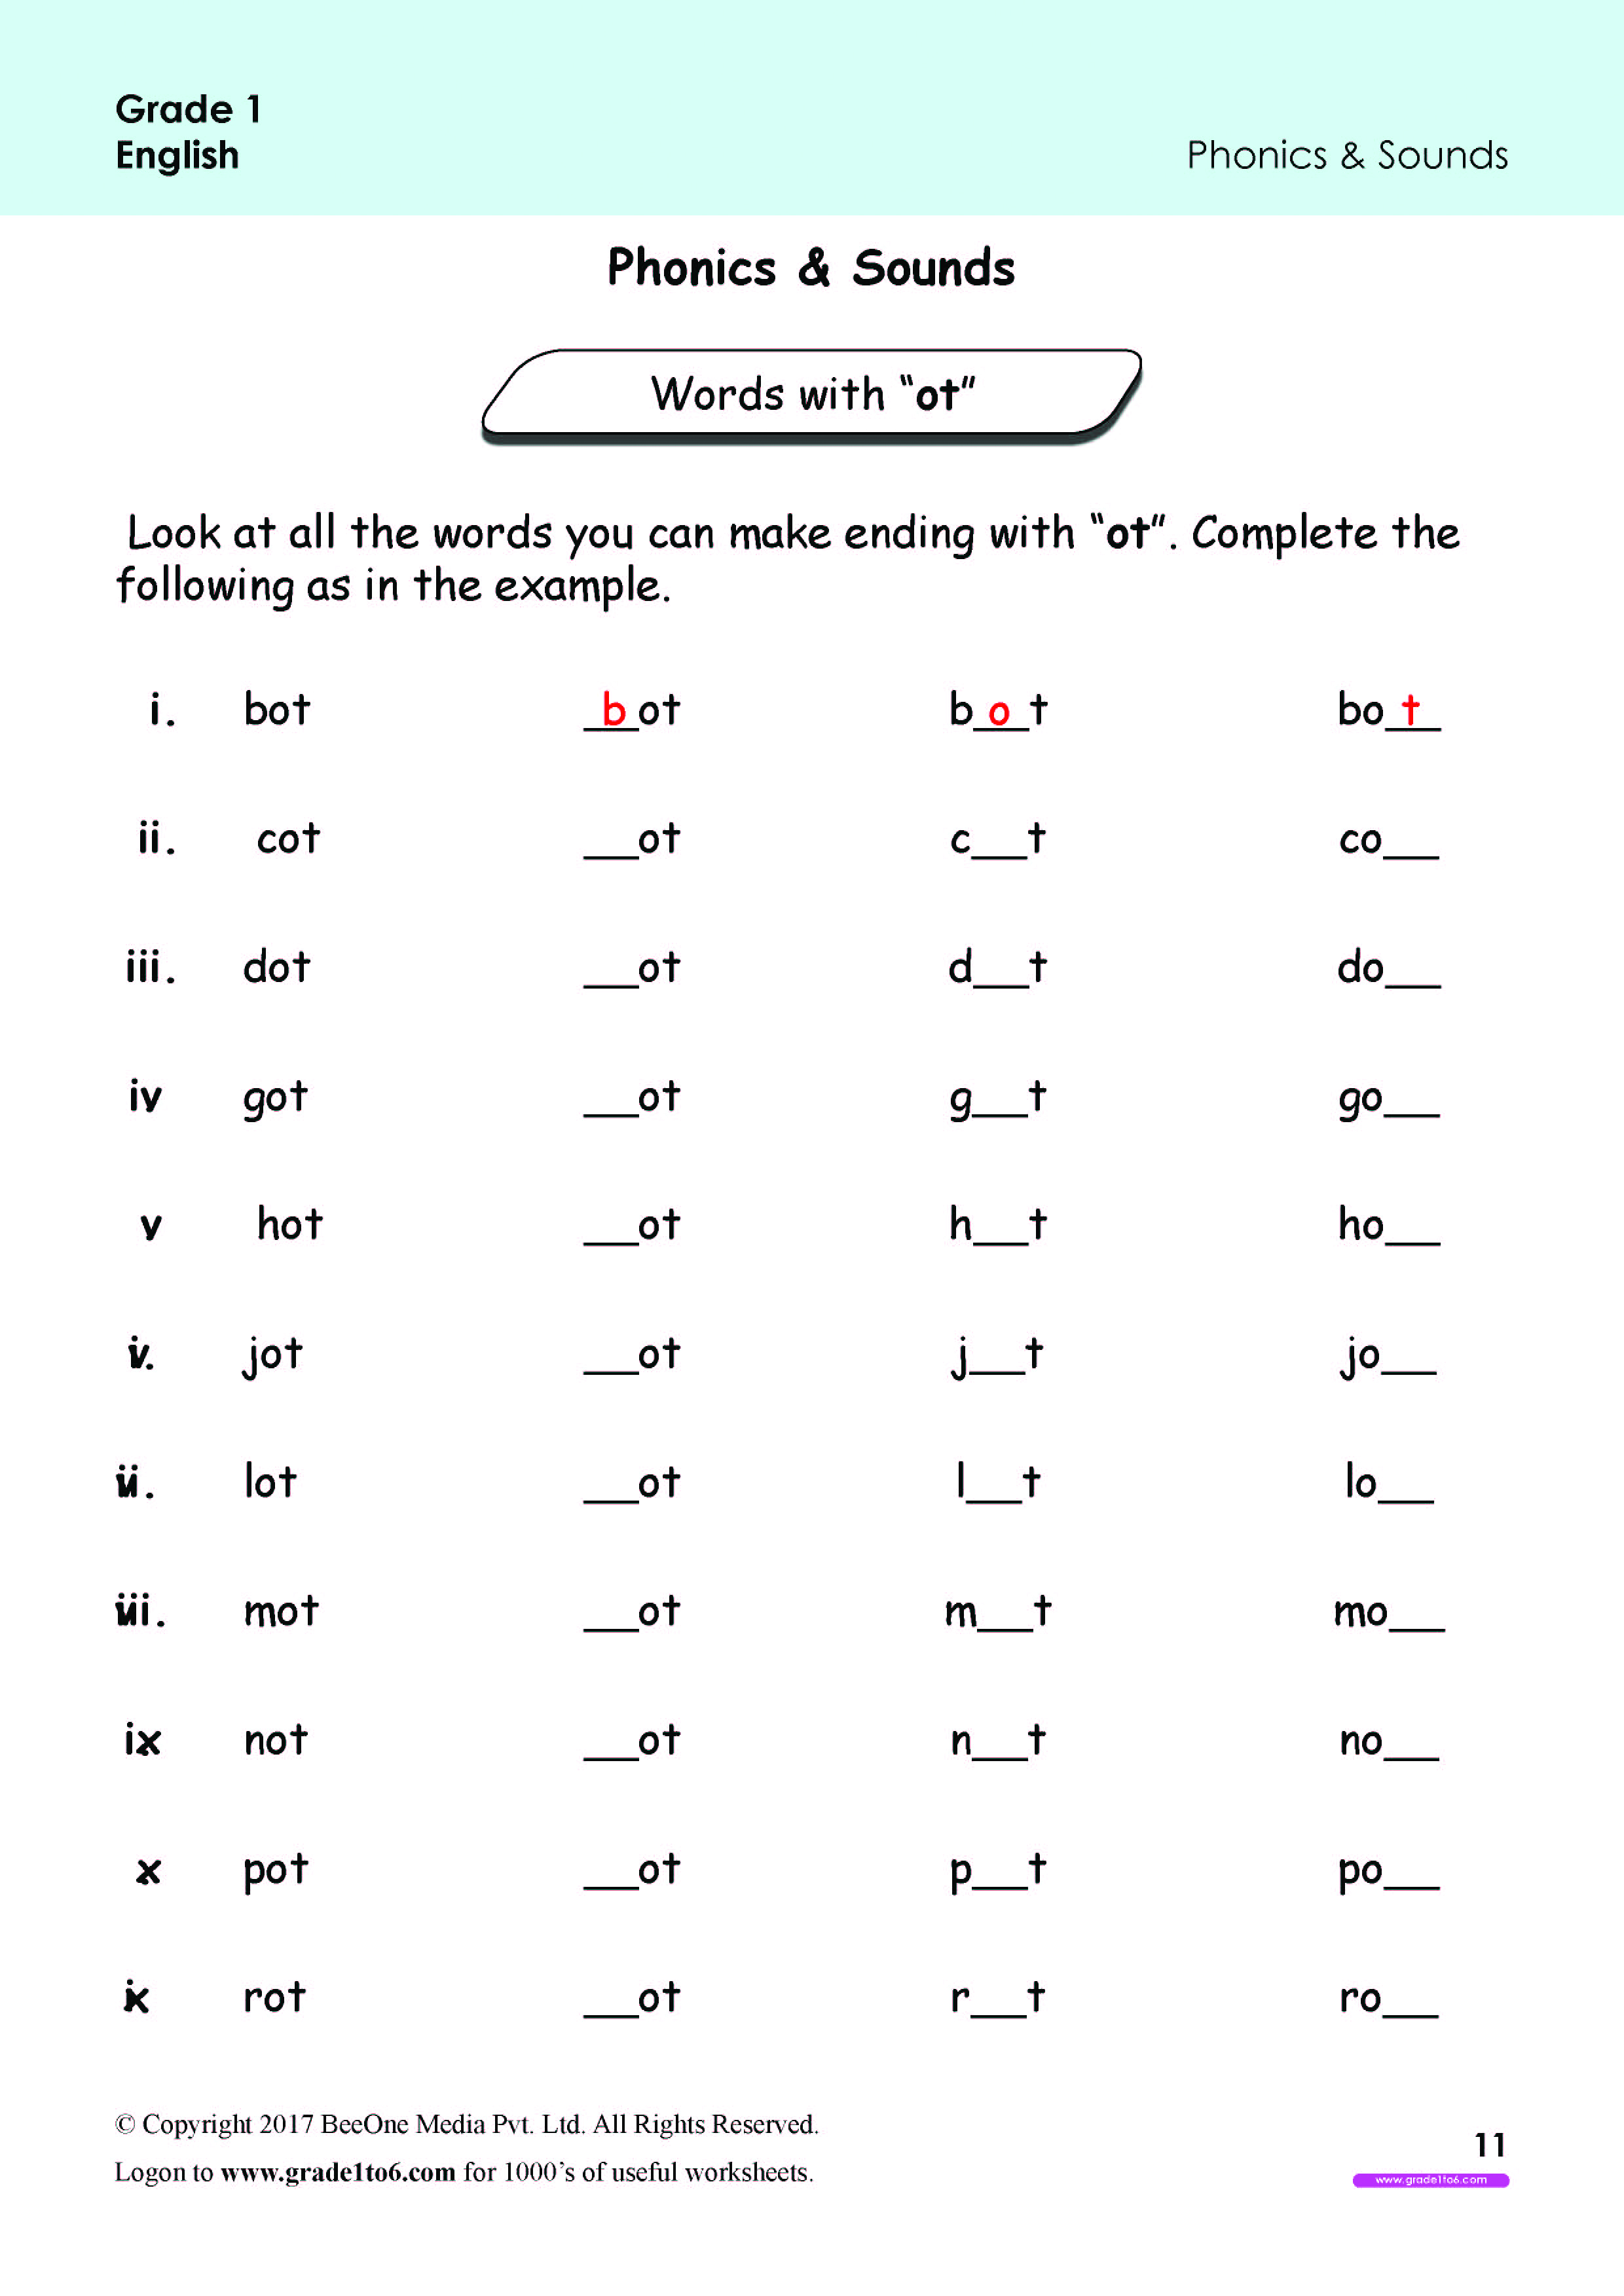 Free Class 1 English Worksheets